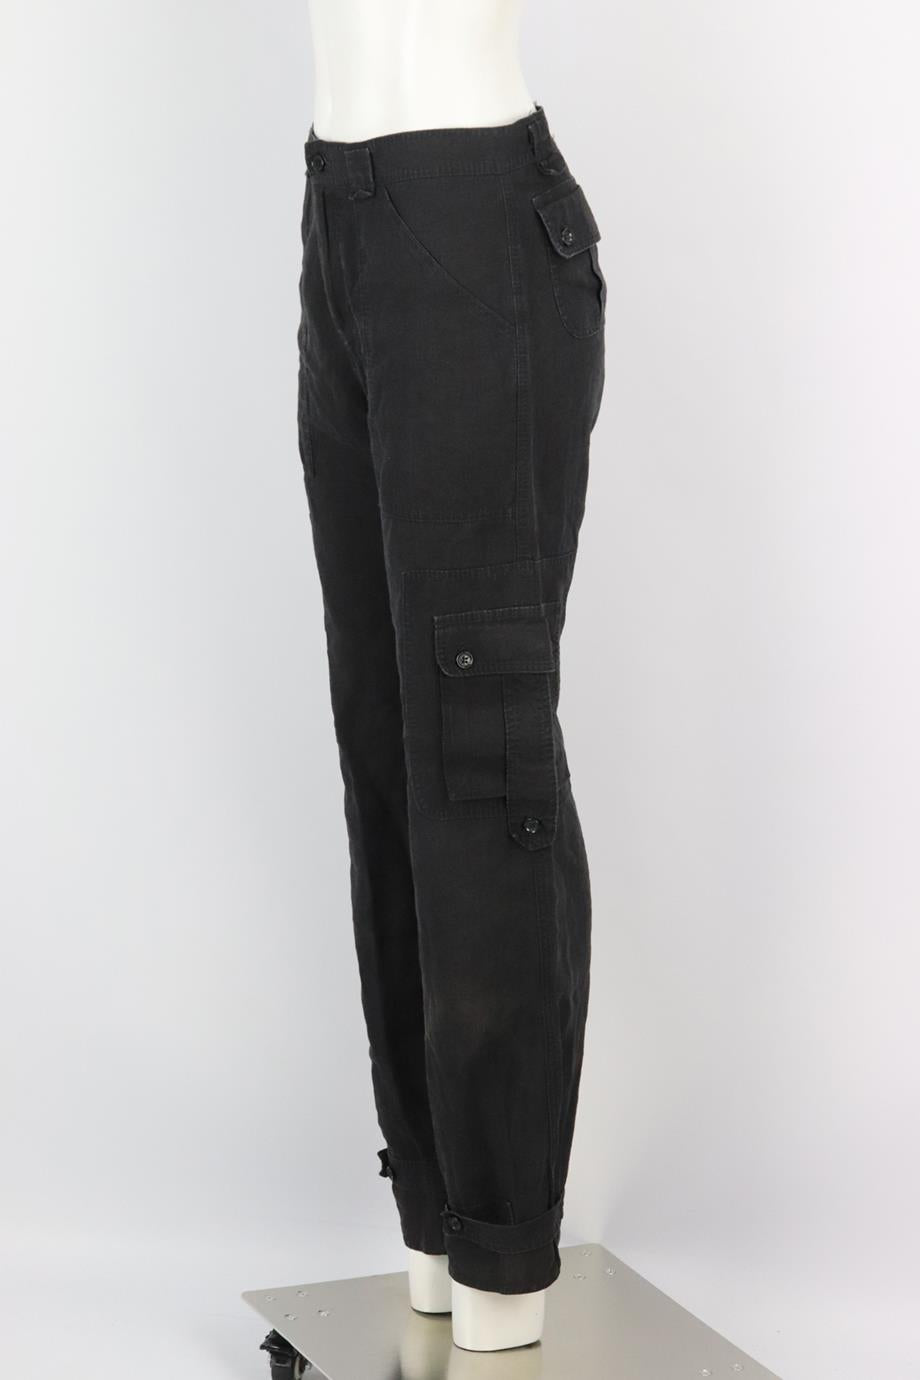 DOLCE AND GABBANA LINEN TAPERED CARGO PANTS IT 38 UK 6